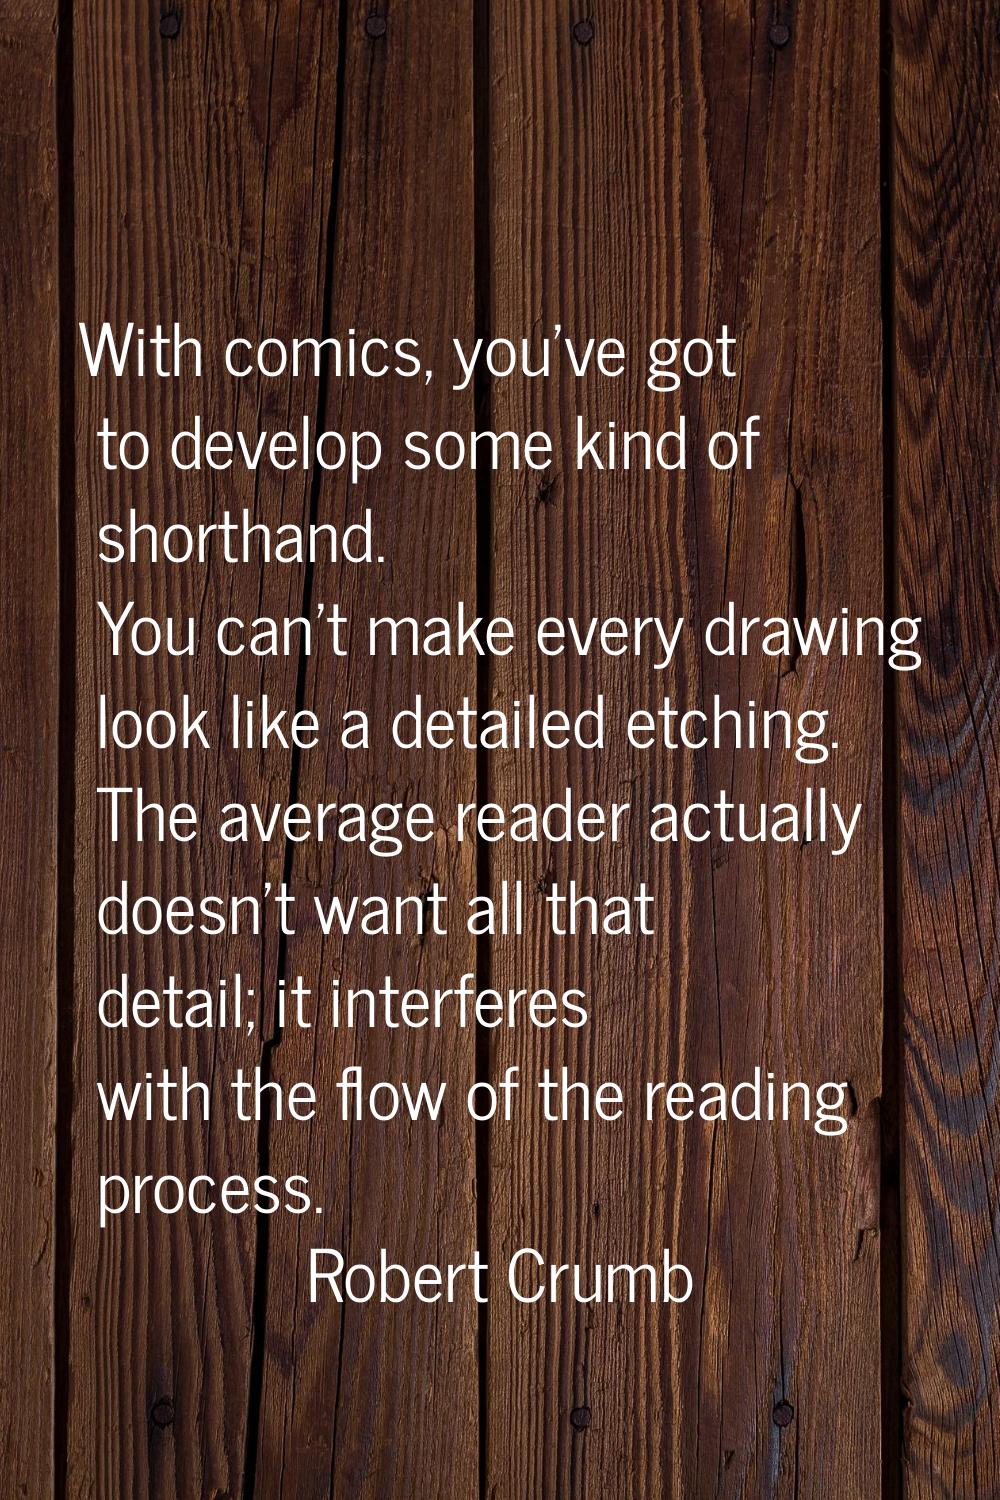 With comics, you've got to develop some kind of shorthand. You can't make every drawing look like a